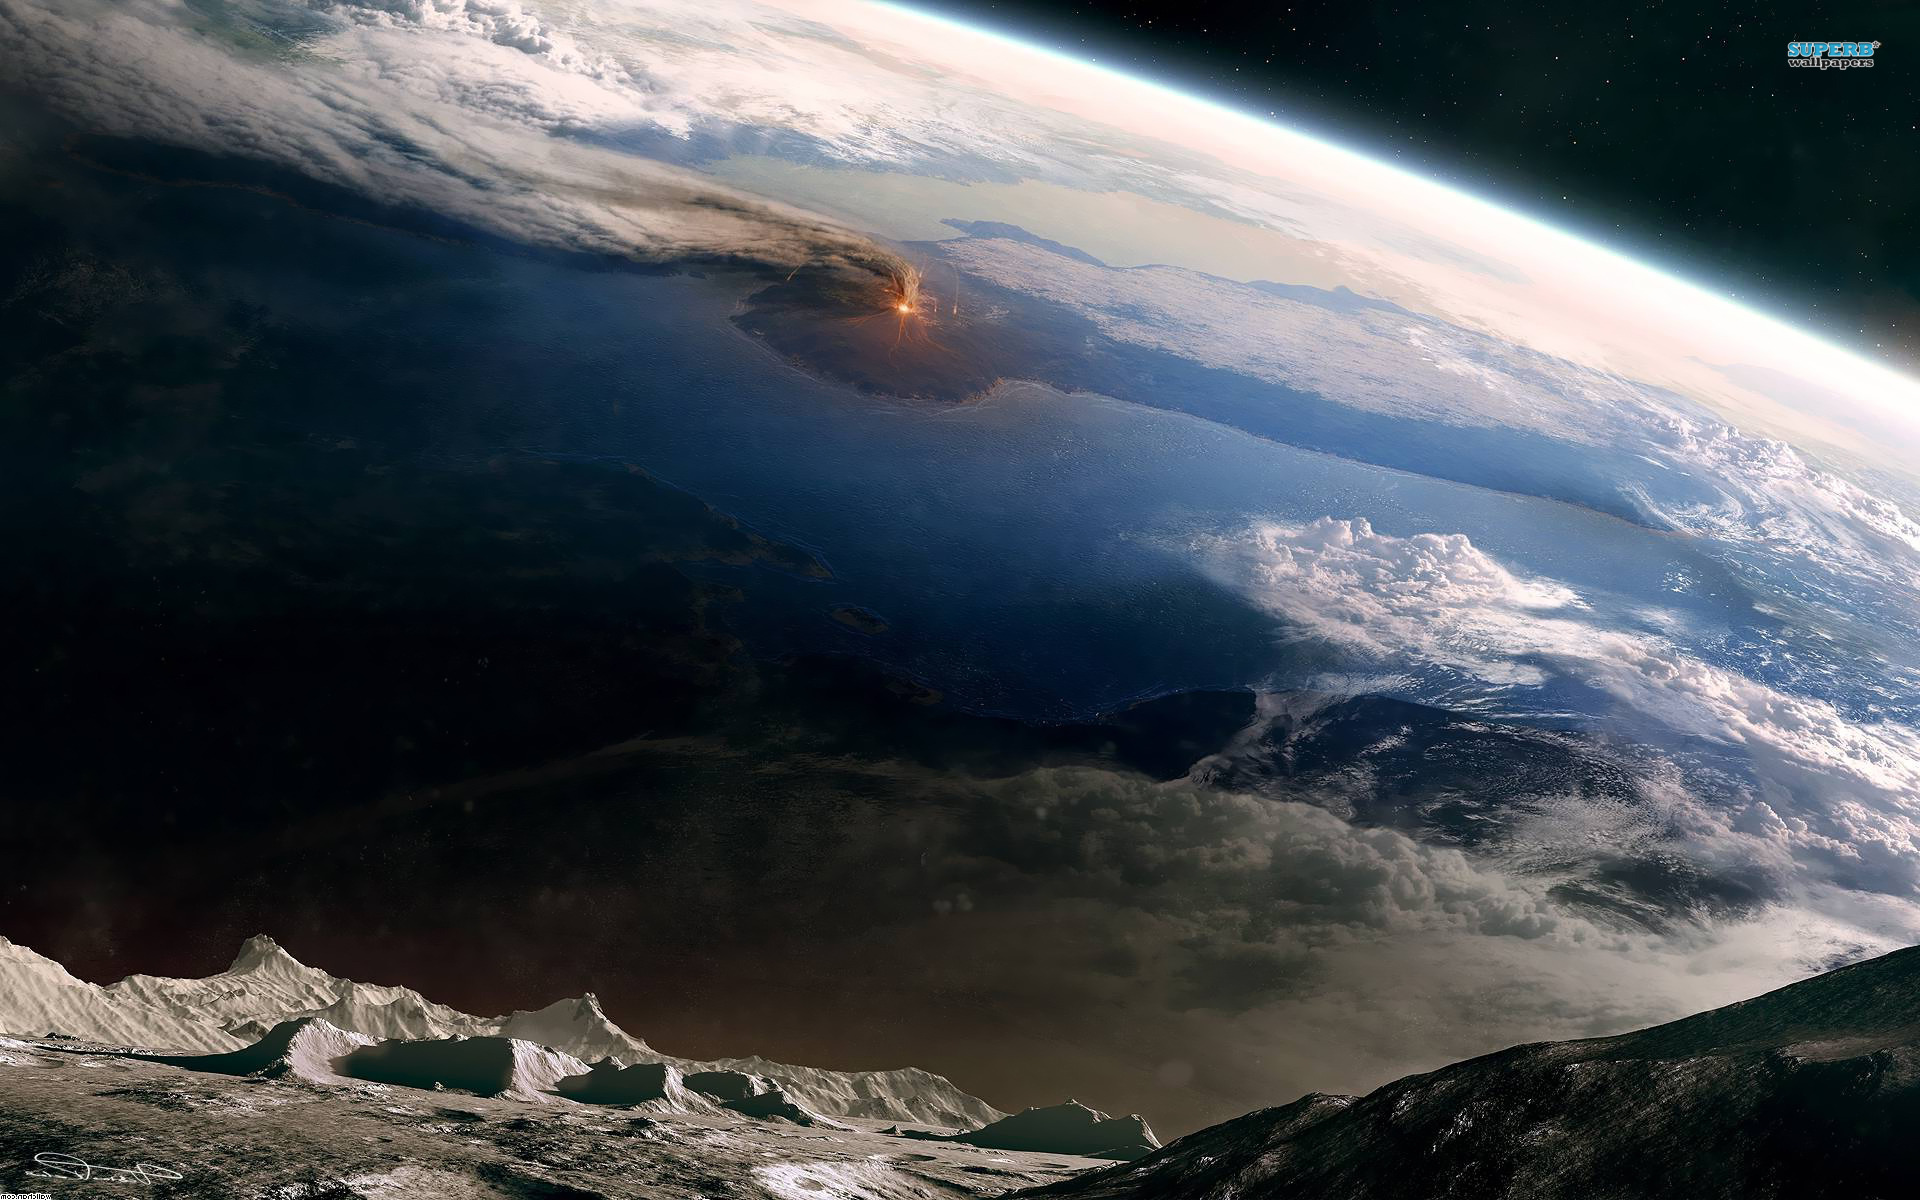 Volcano eruption view from the moon wallpaper - Fantasy wallpapers